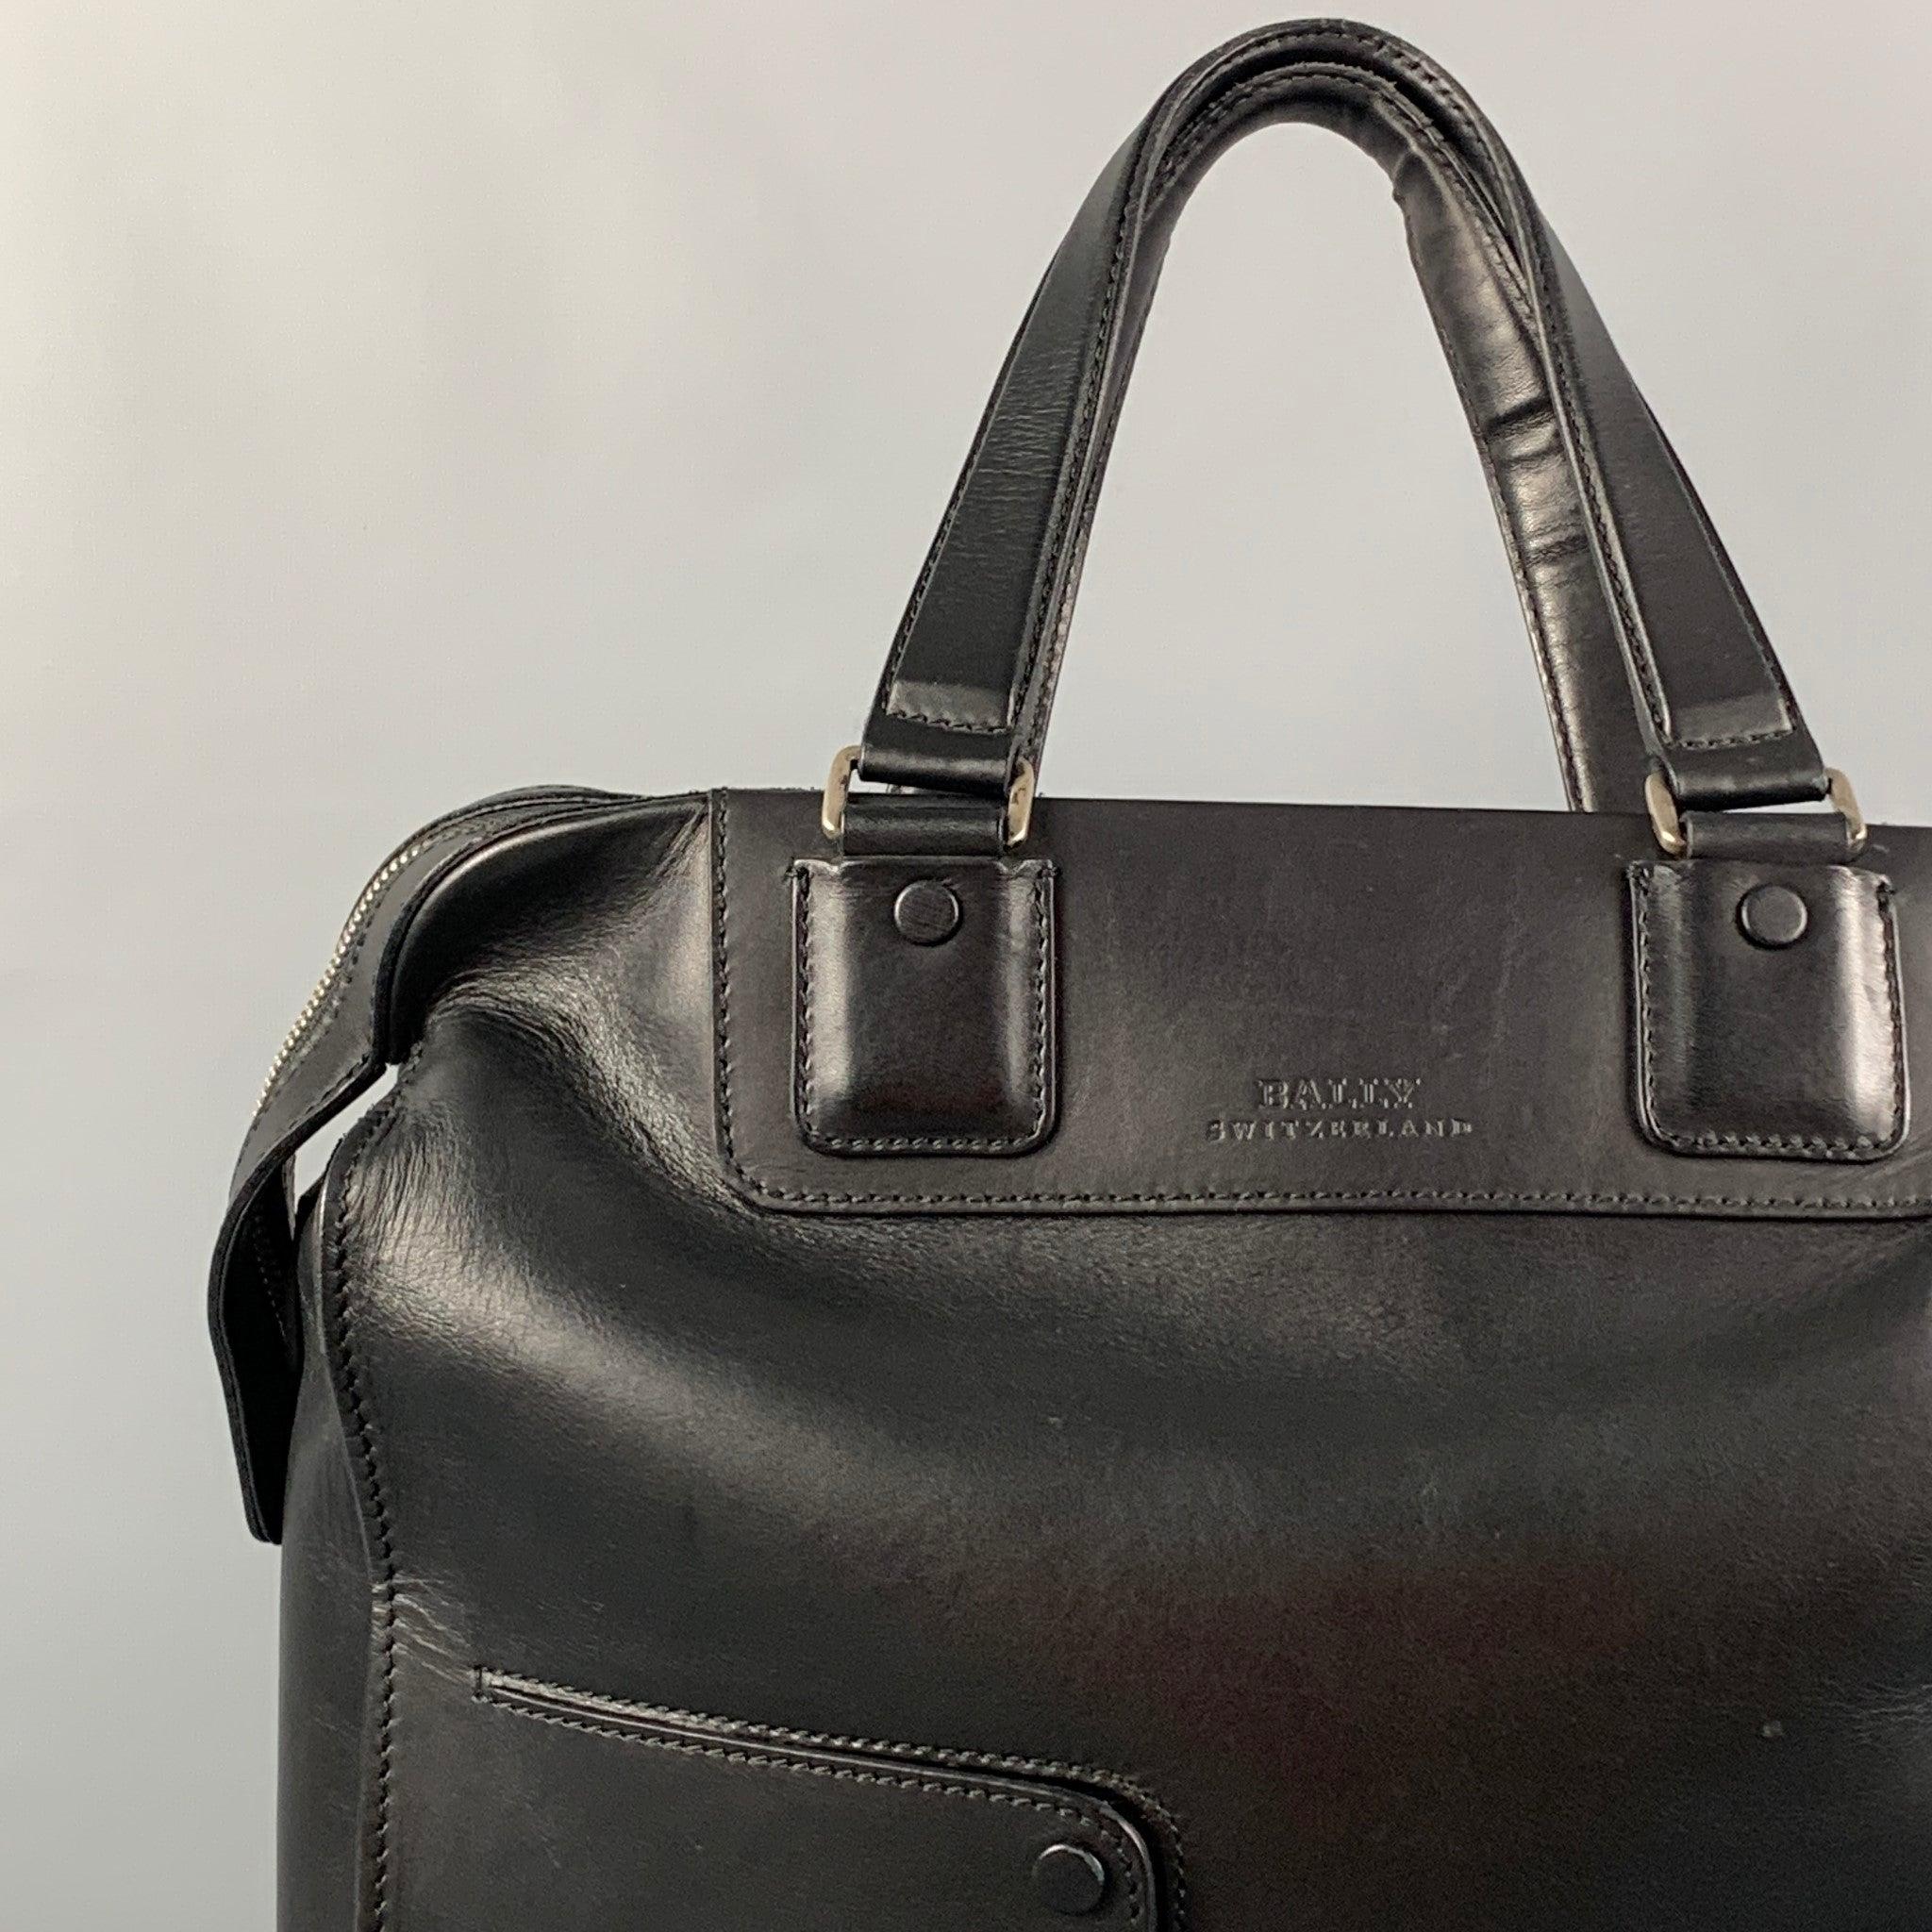 BALLY bag comes in a black leather featuring a tote style, top handles, front pockets, silver tone hardware, and a zipper closure.
Very Good
Pre-Owned Condition. Minor wear. As-is.  

Measurements: 
  Length:
14.25 inches Width: 7 inches Height: